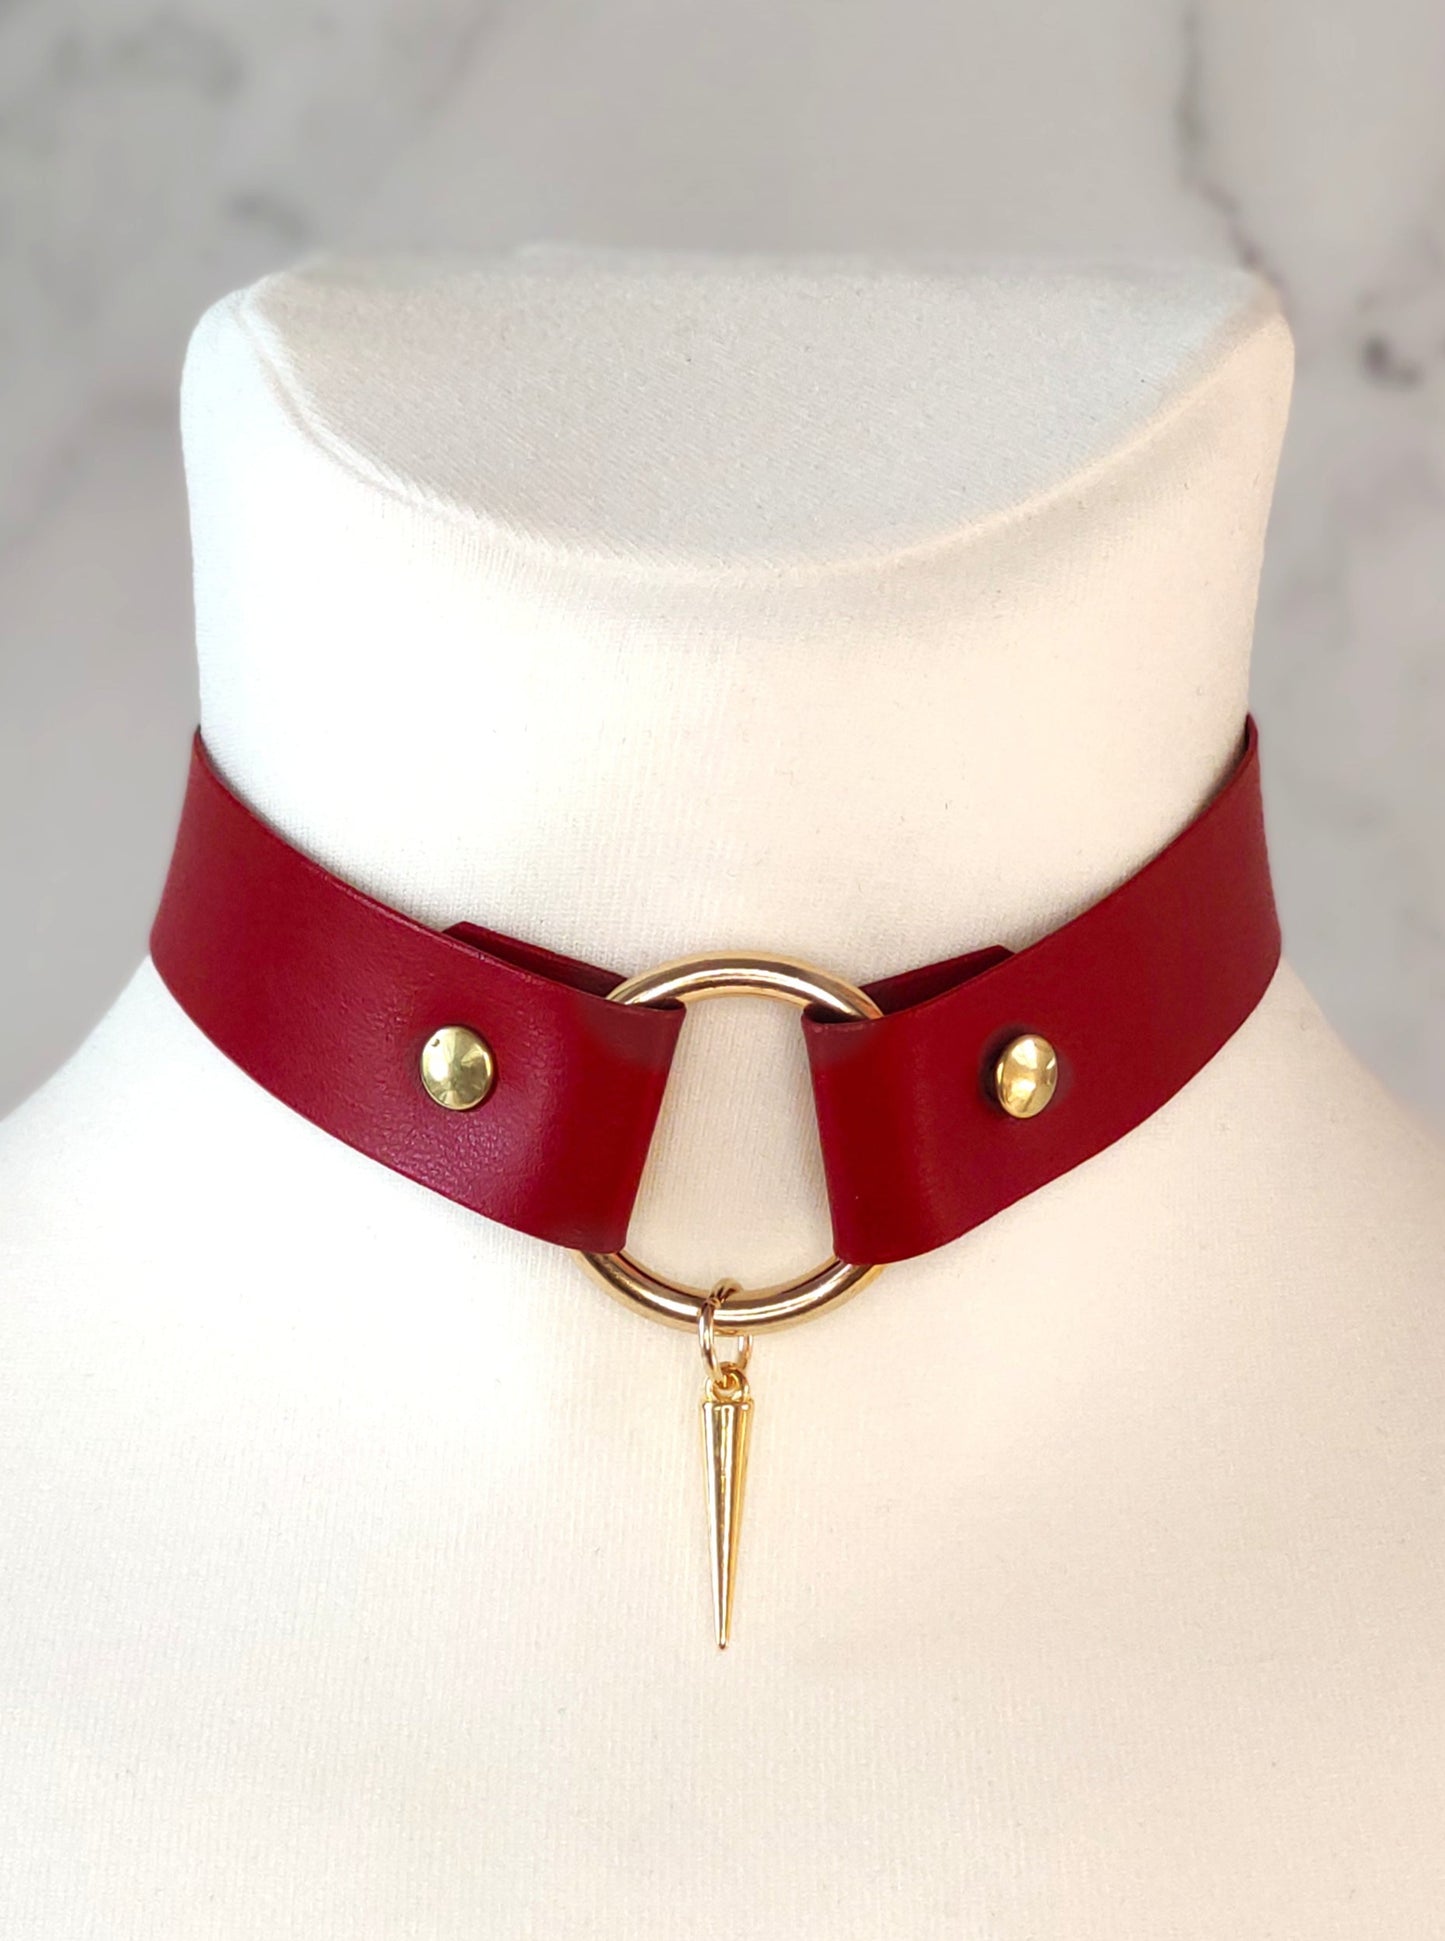 Leather collar with a chain